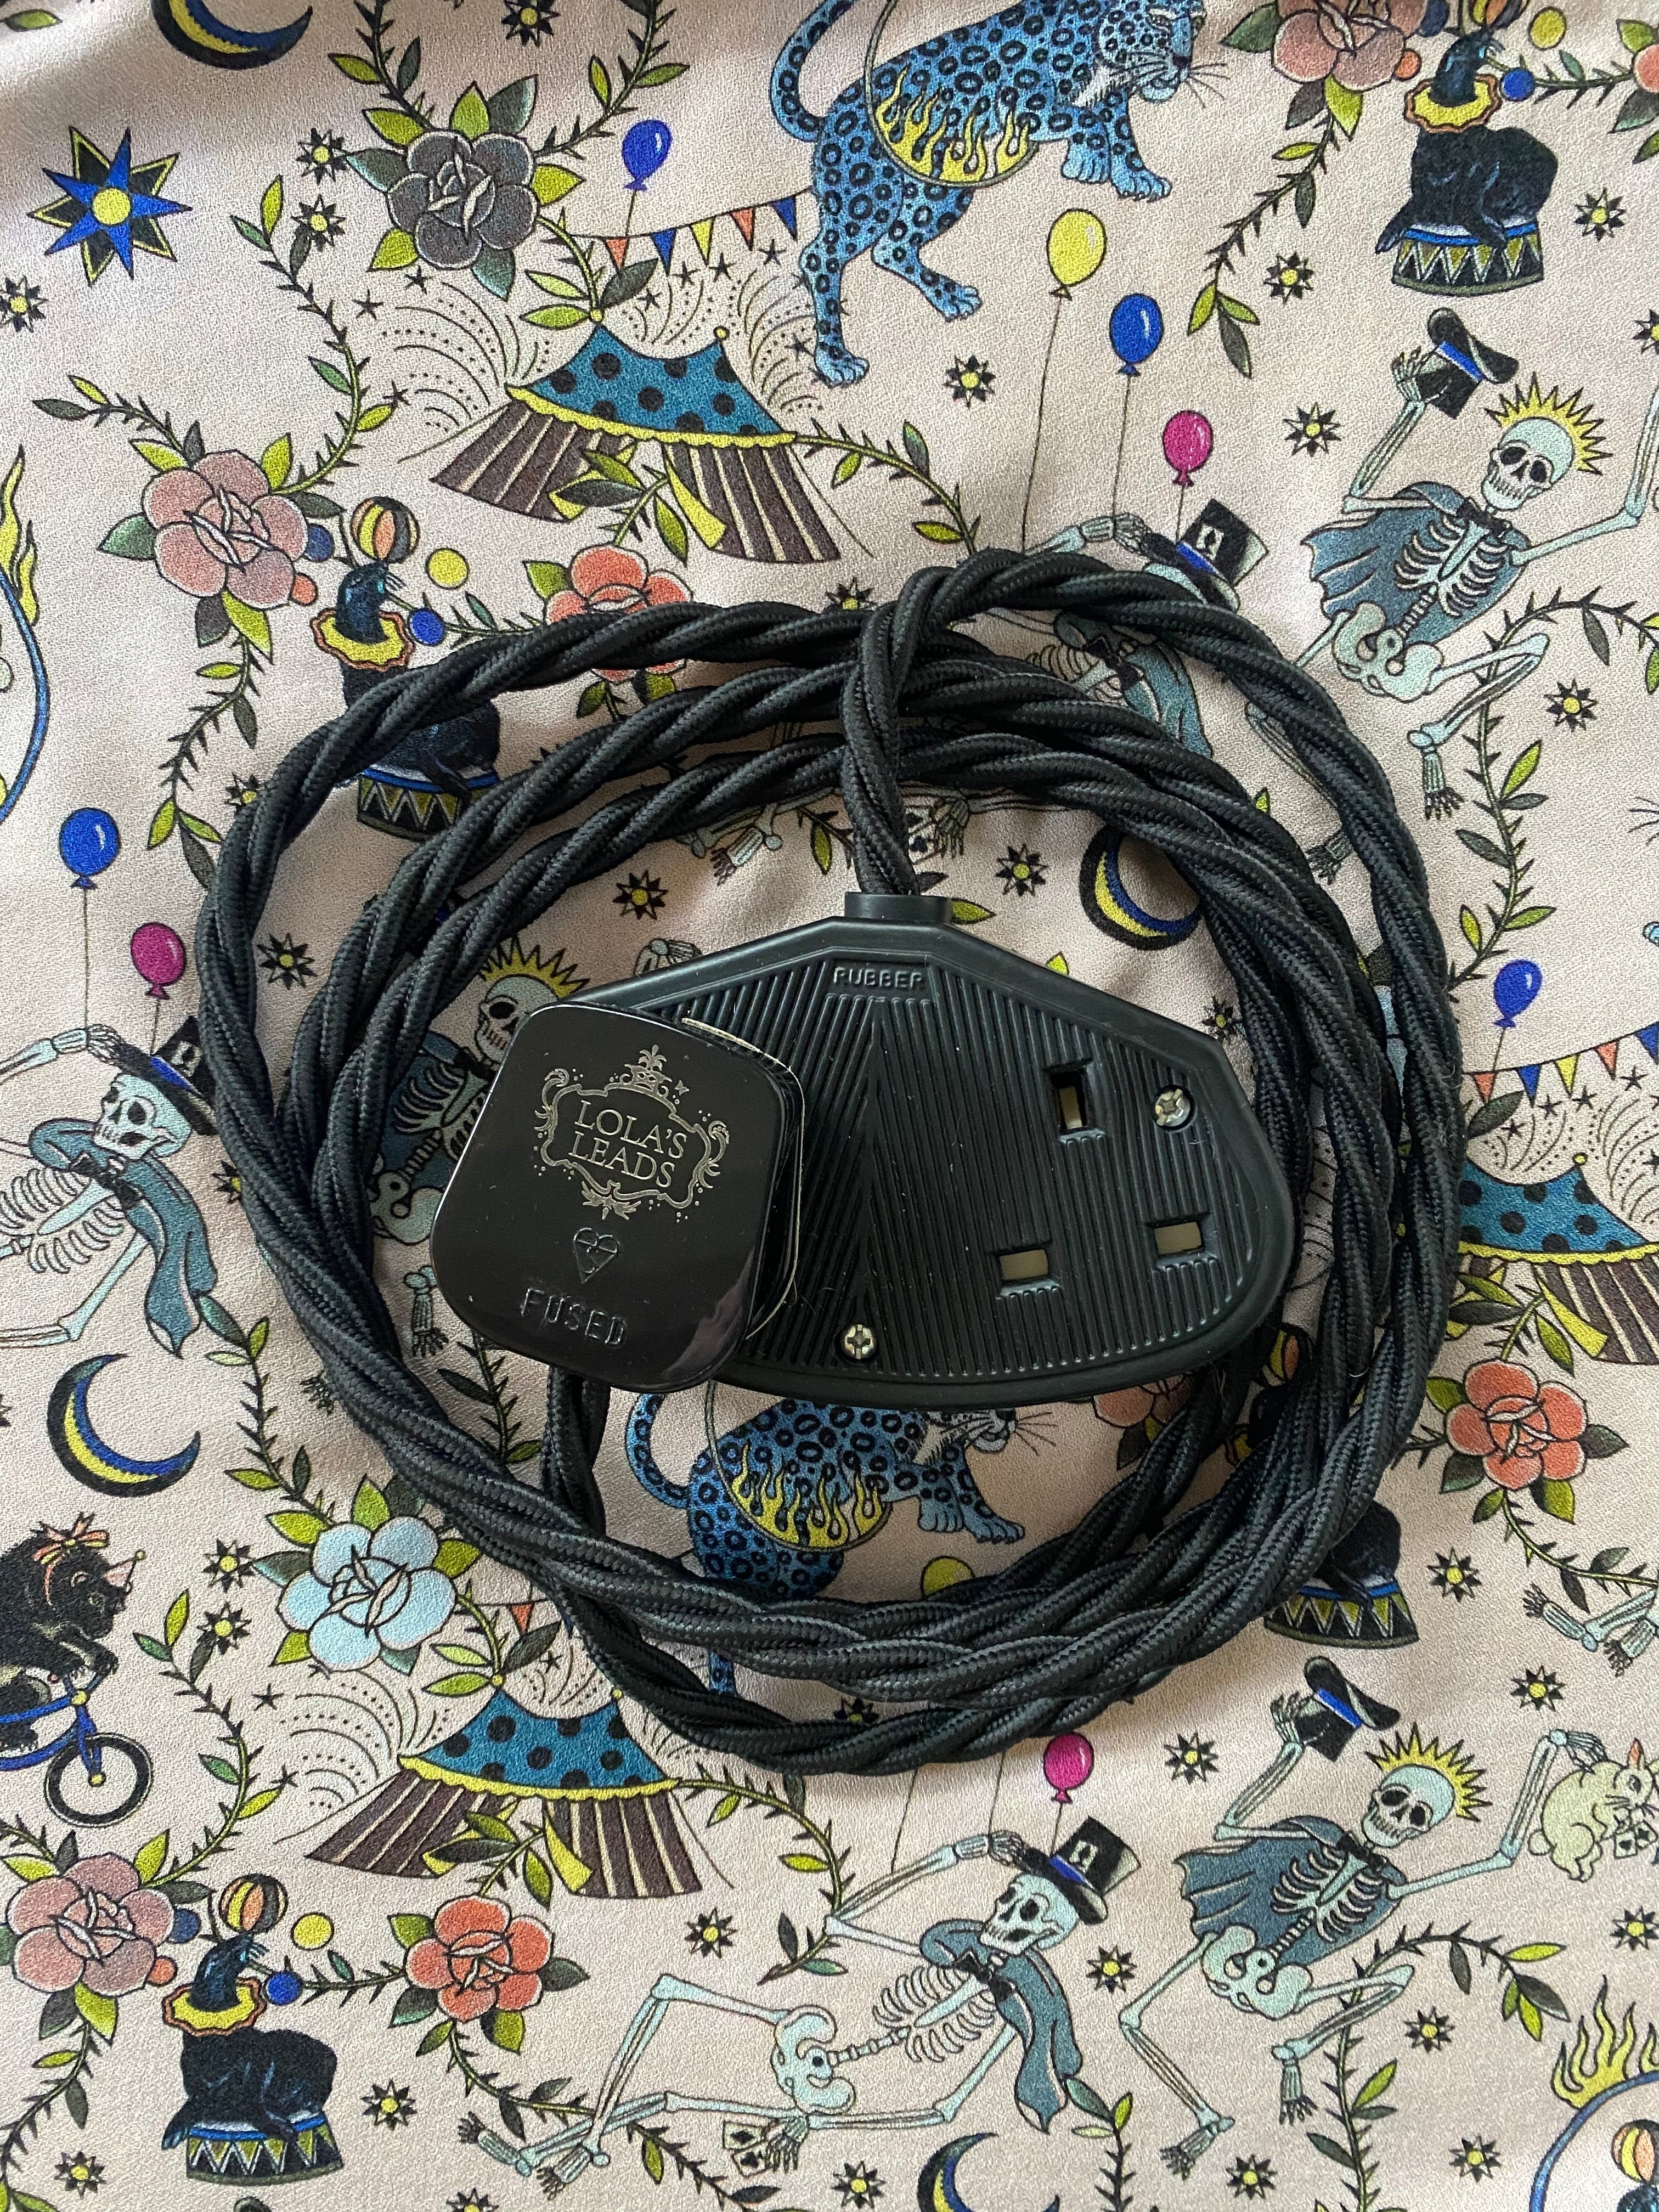 Lola's Leads Black Fabric Covered Extension Cable